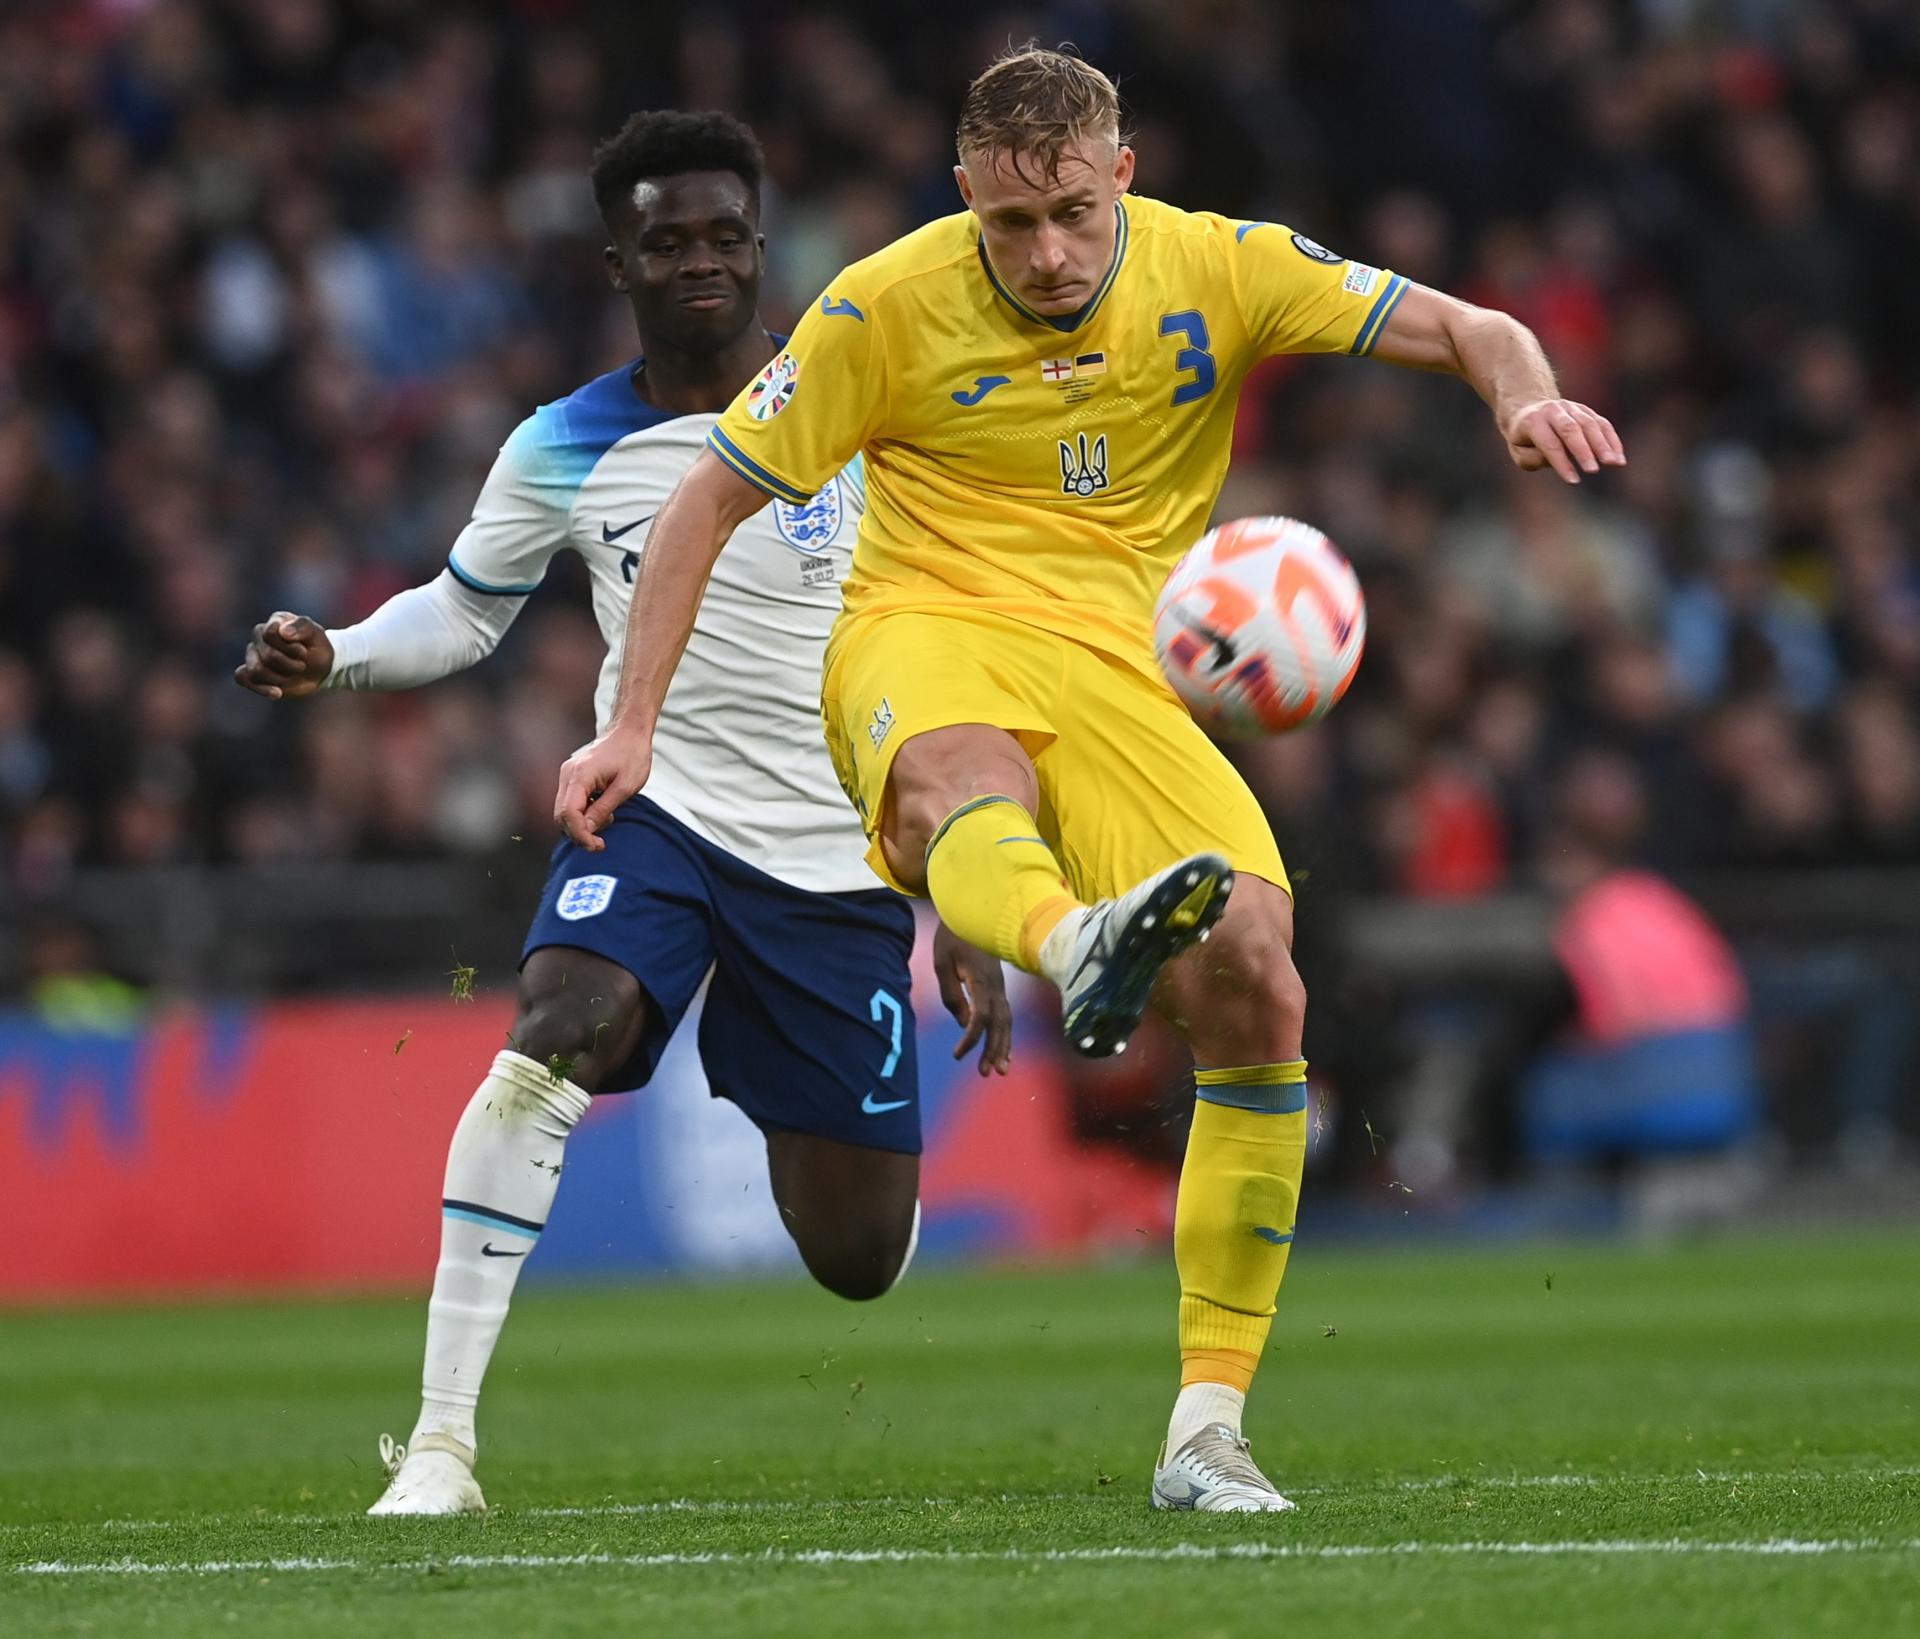 Action during the UEFA Euro 2024 qualifying match between England and Ukraine at London's Wembley Stadium on March 26, 2023. EFE/EPA/NEIL HALL